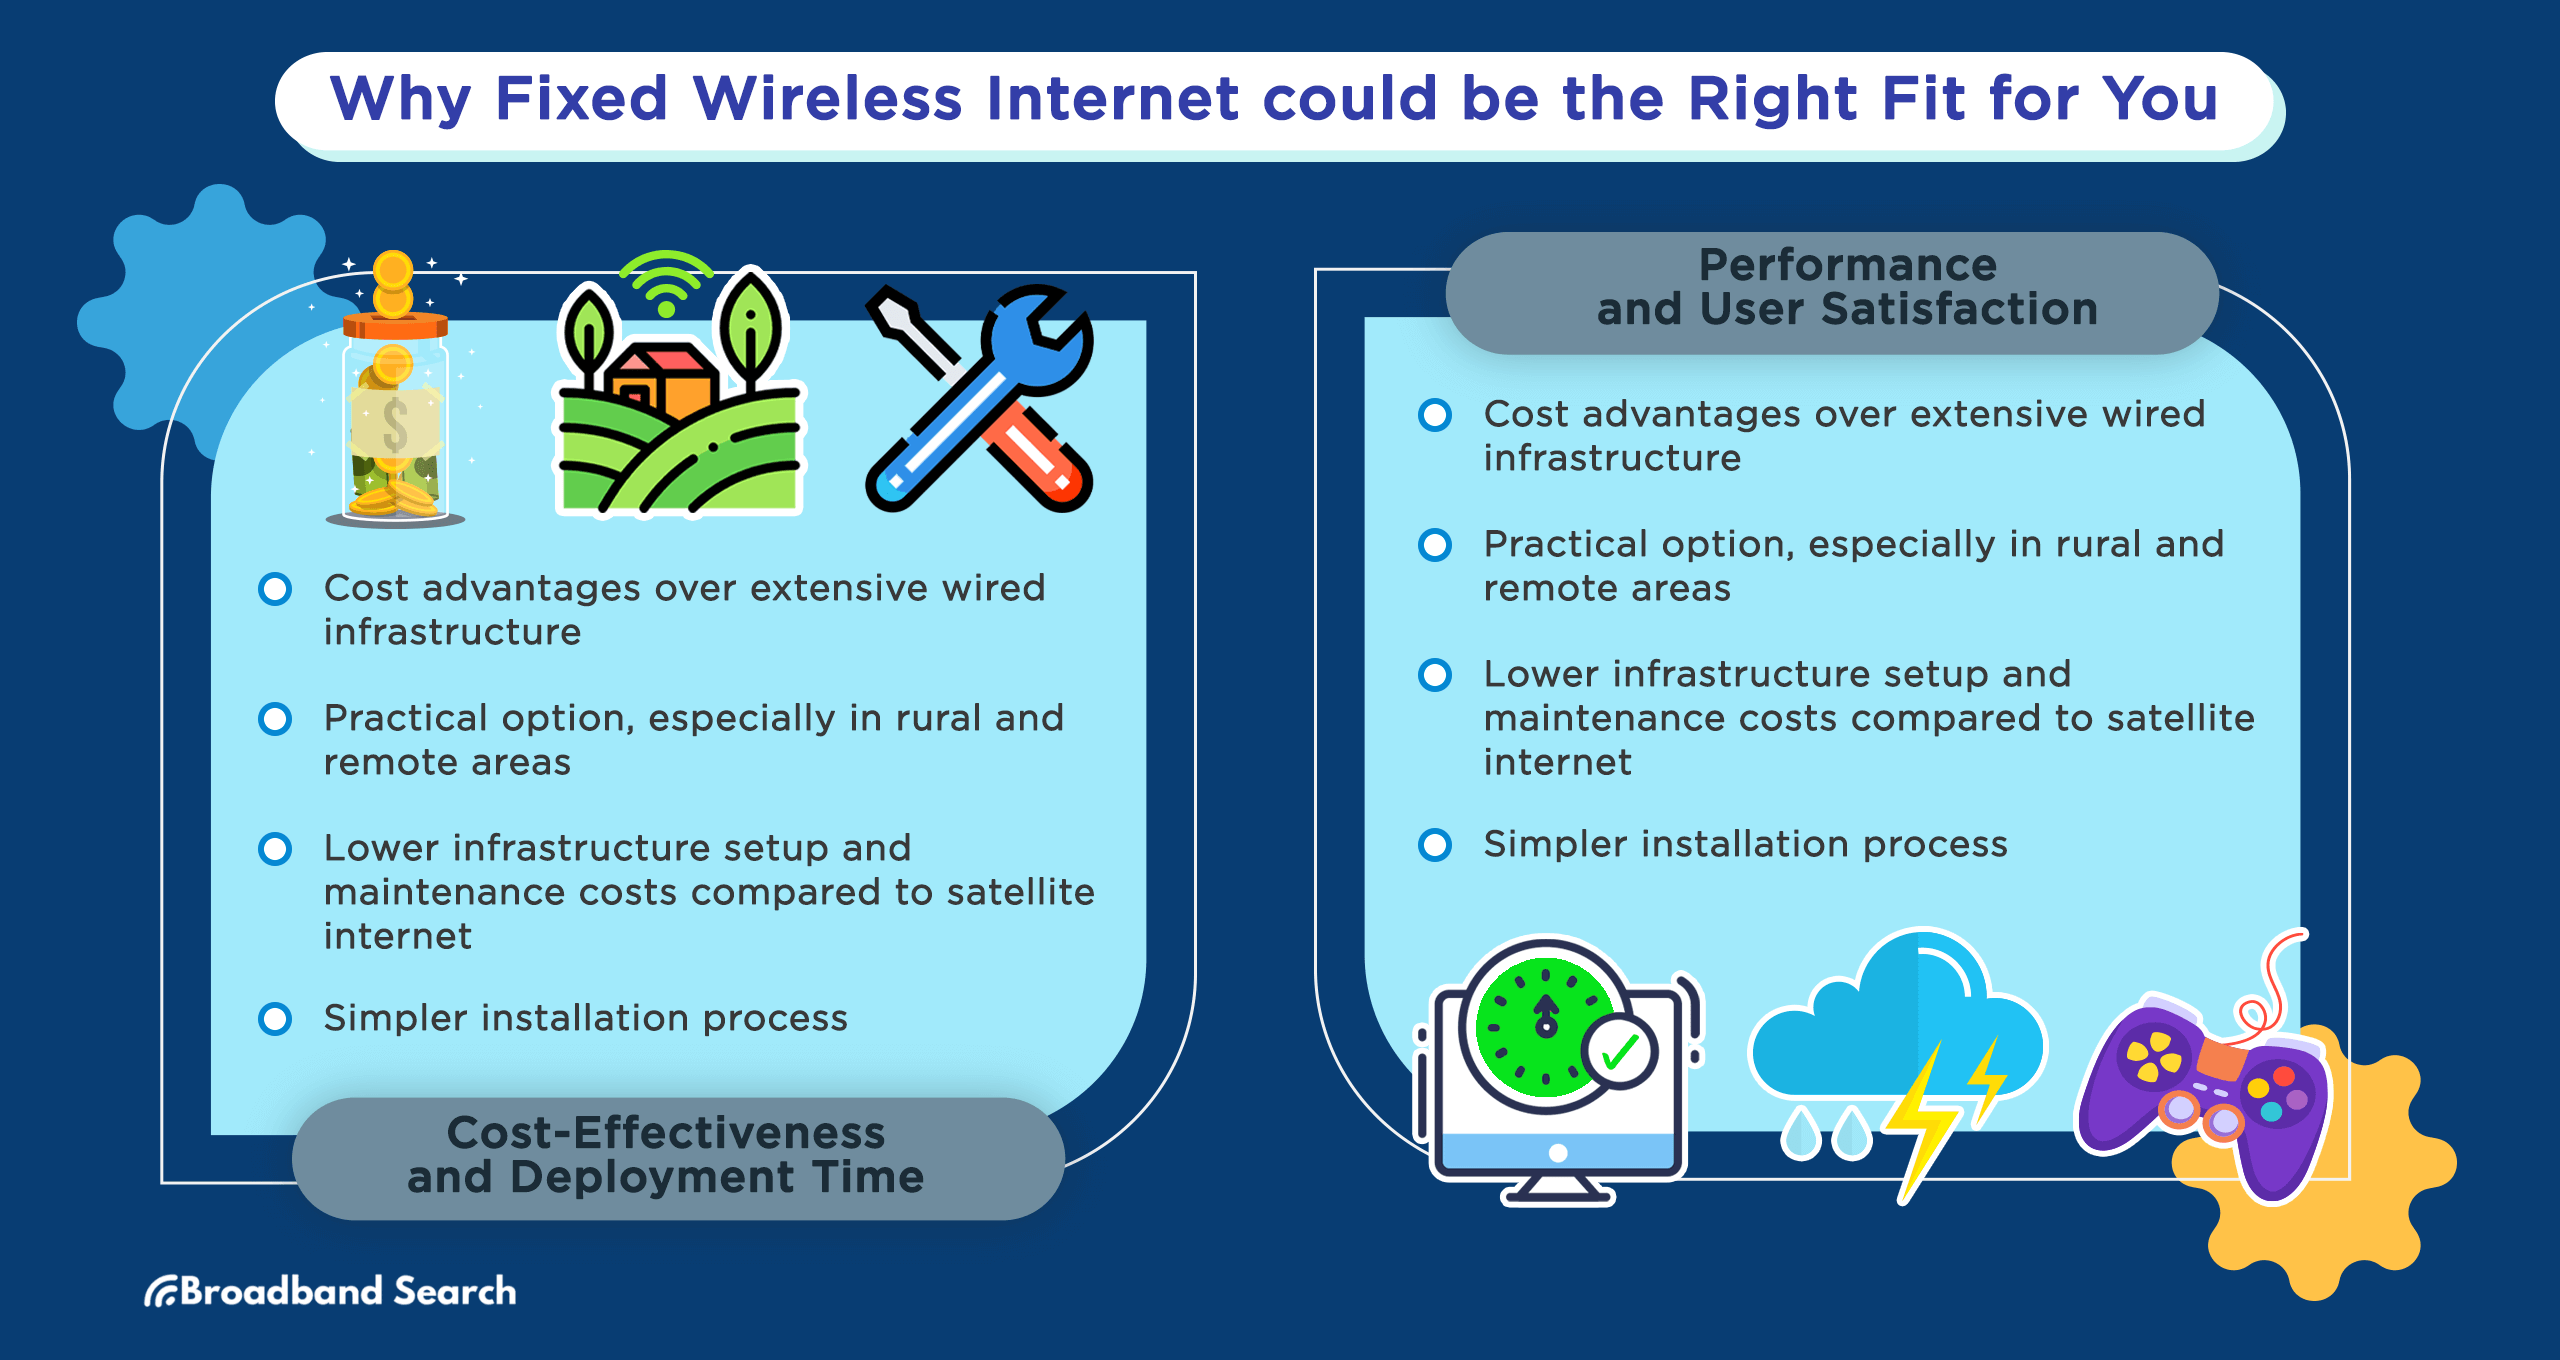 Reasons Why fixed wireless internet could be the right fit for you